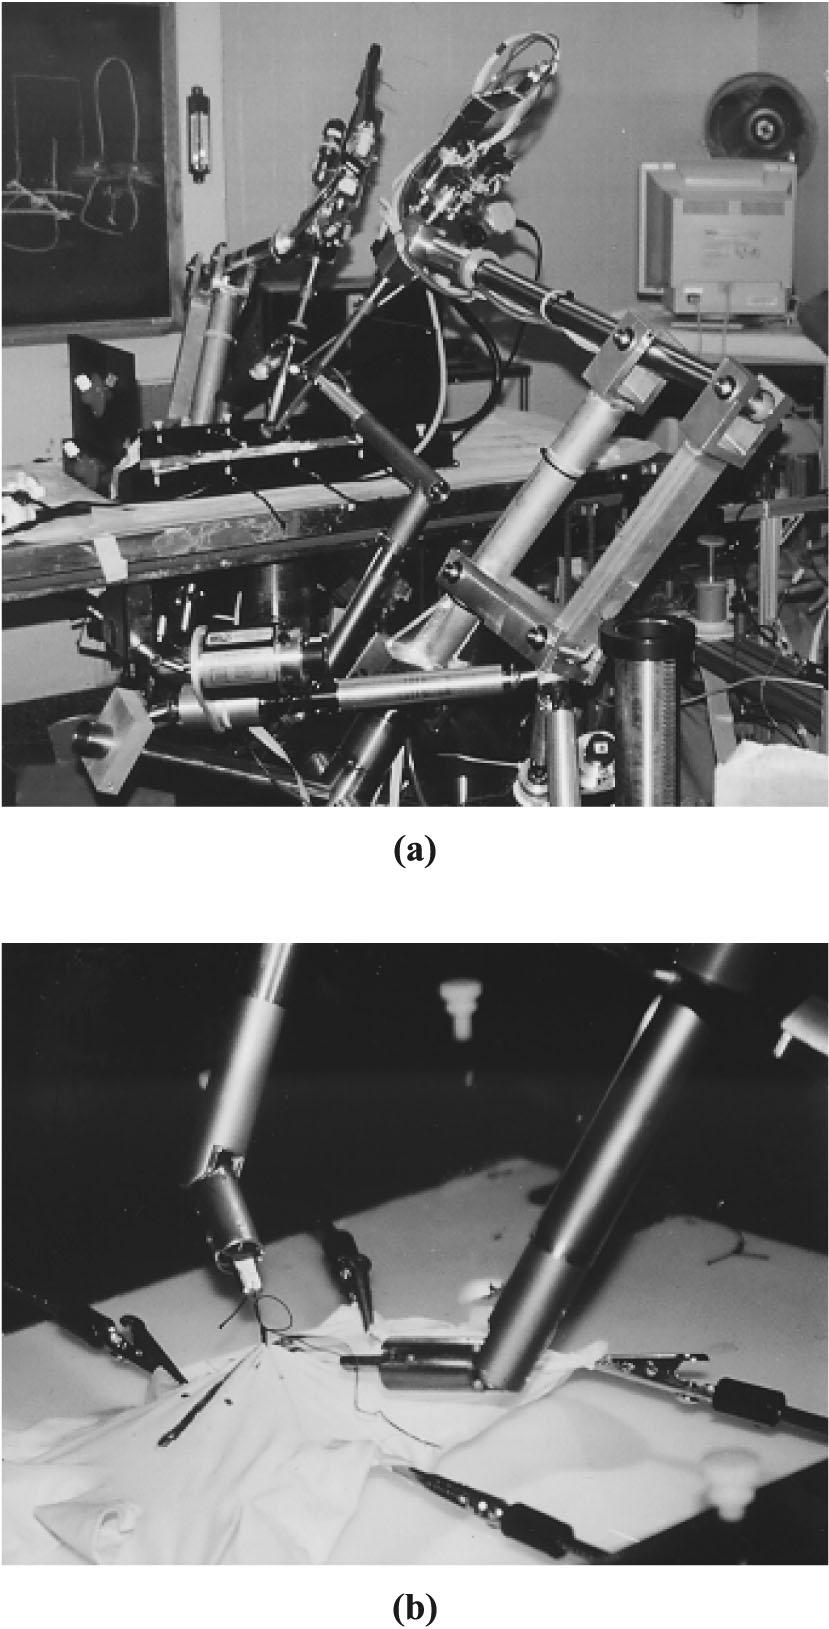 M Cenk Çavuşoğlu et al The wrist-to-gripper length is 5 cm The yaw and roll axes are coupled and actuated with tendons jointed by three DC servo motors located on the end of tool arm outside the body